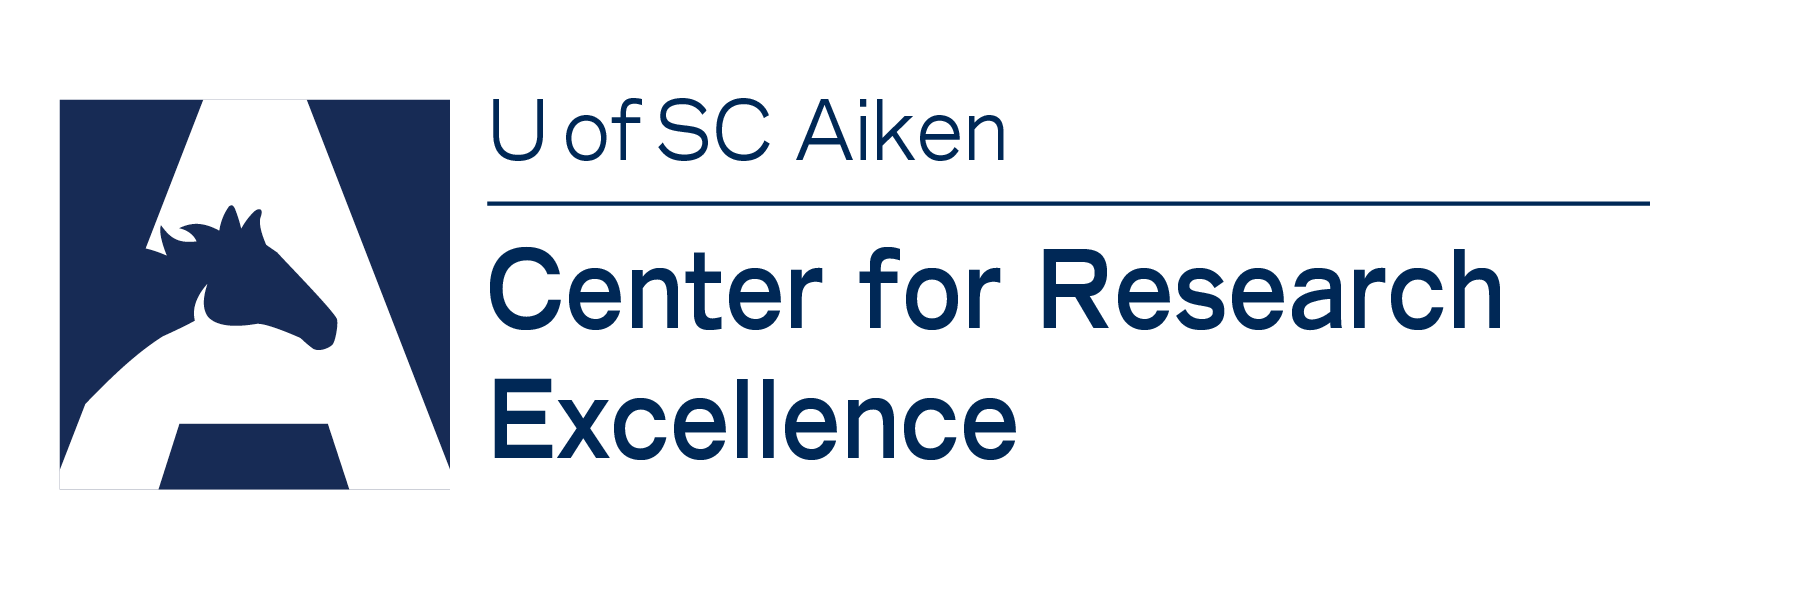 Center for Research Excellence logo